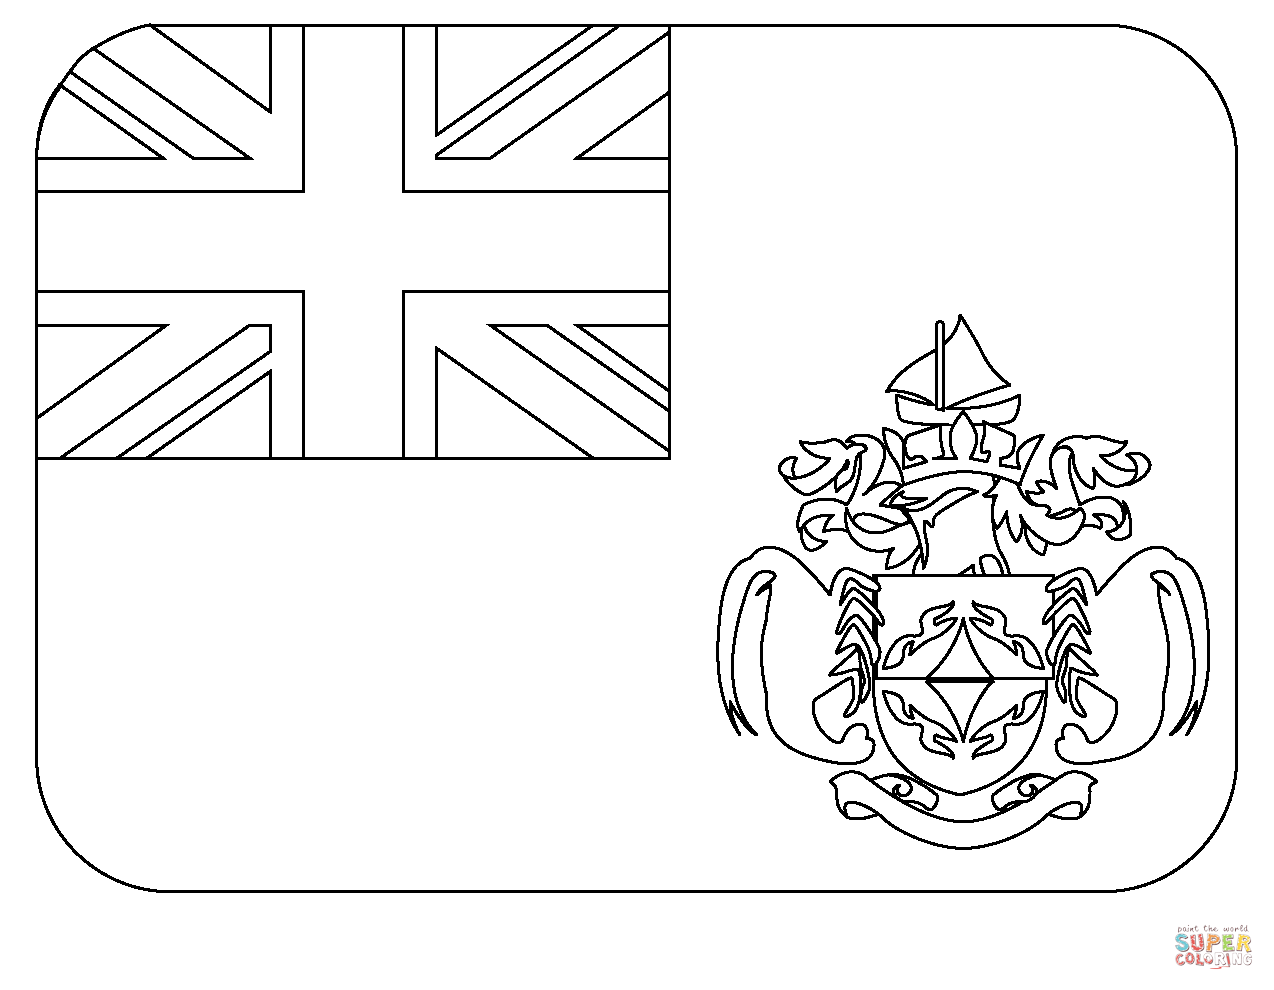 Flag of tristan da cunha emoji coloring page free printable coloring pages